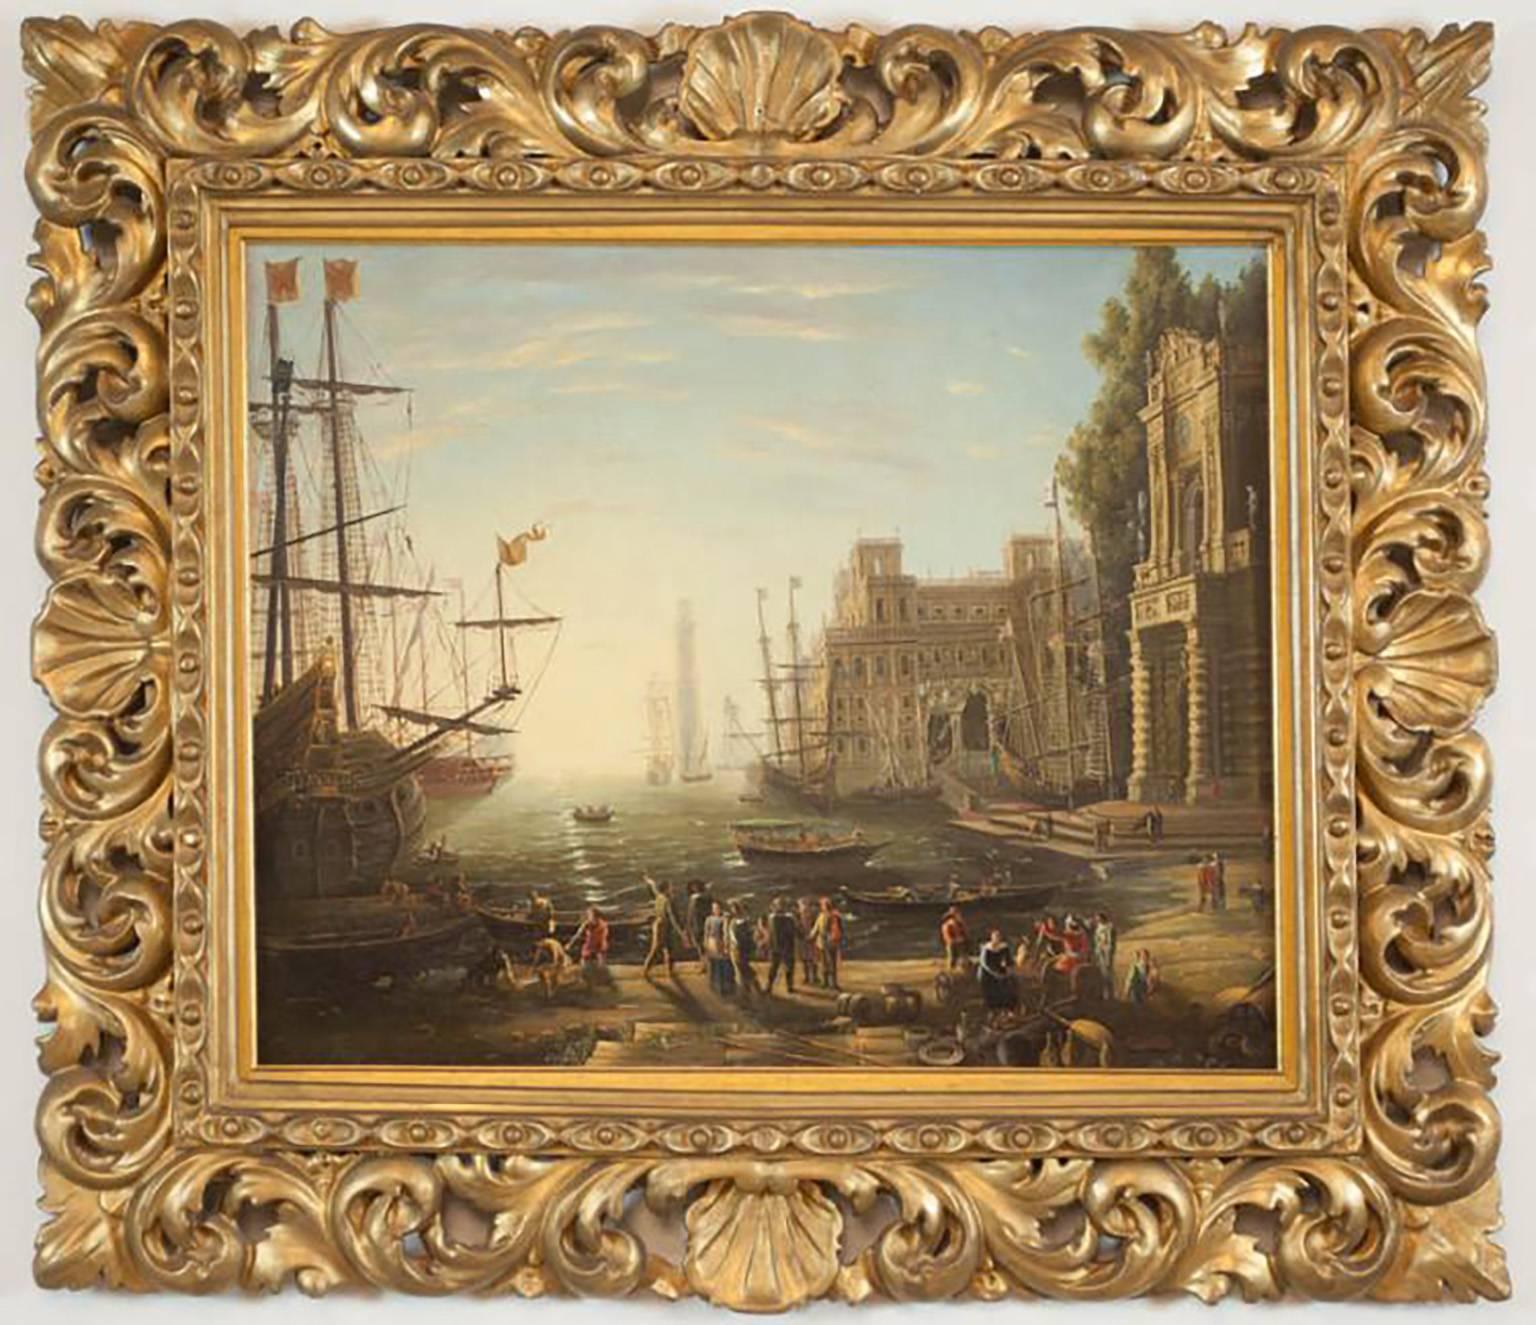 Unknown Landscape Painting - 18th Century European Harbor Oil Painting After Claude Lorrain